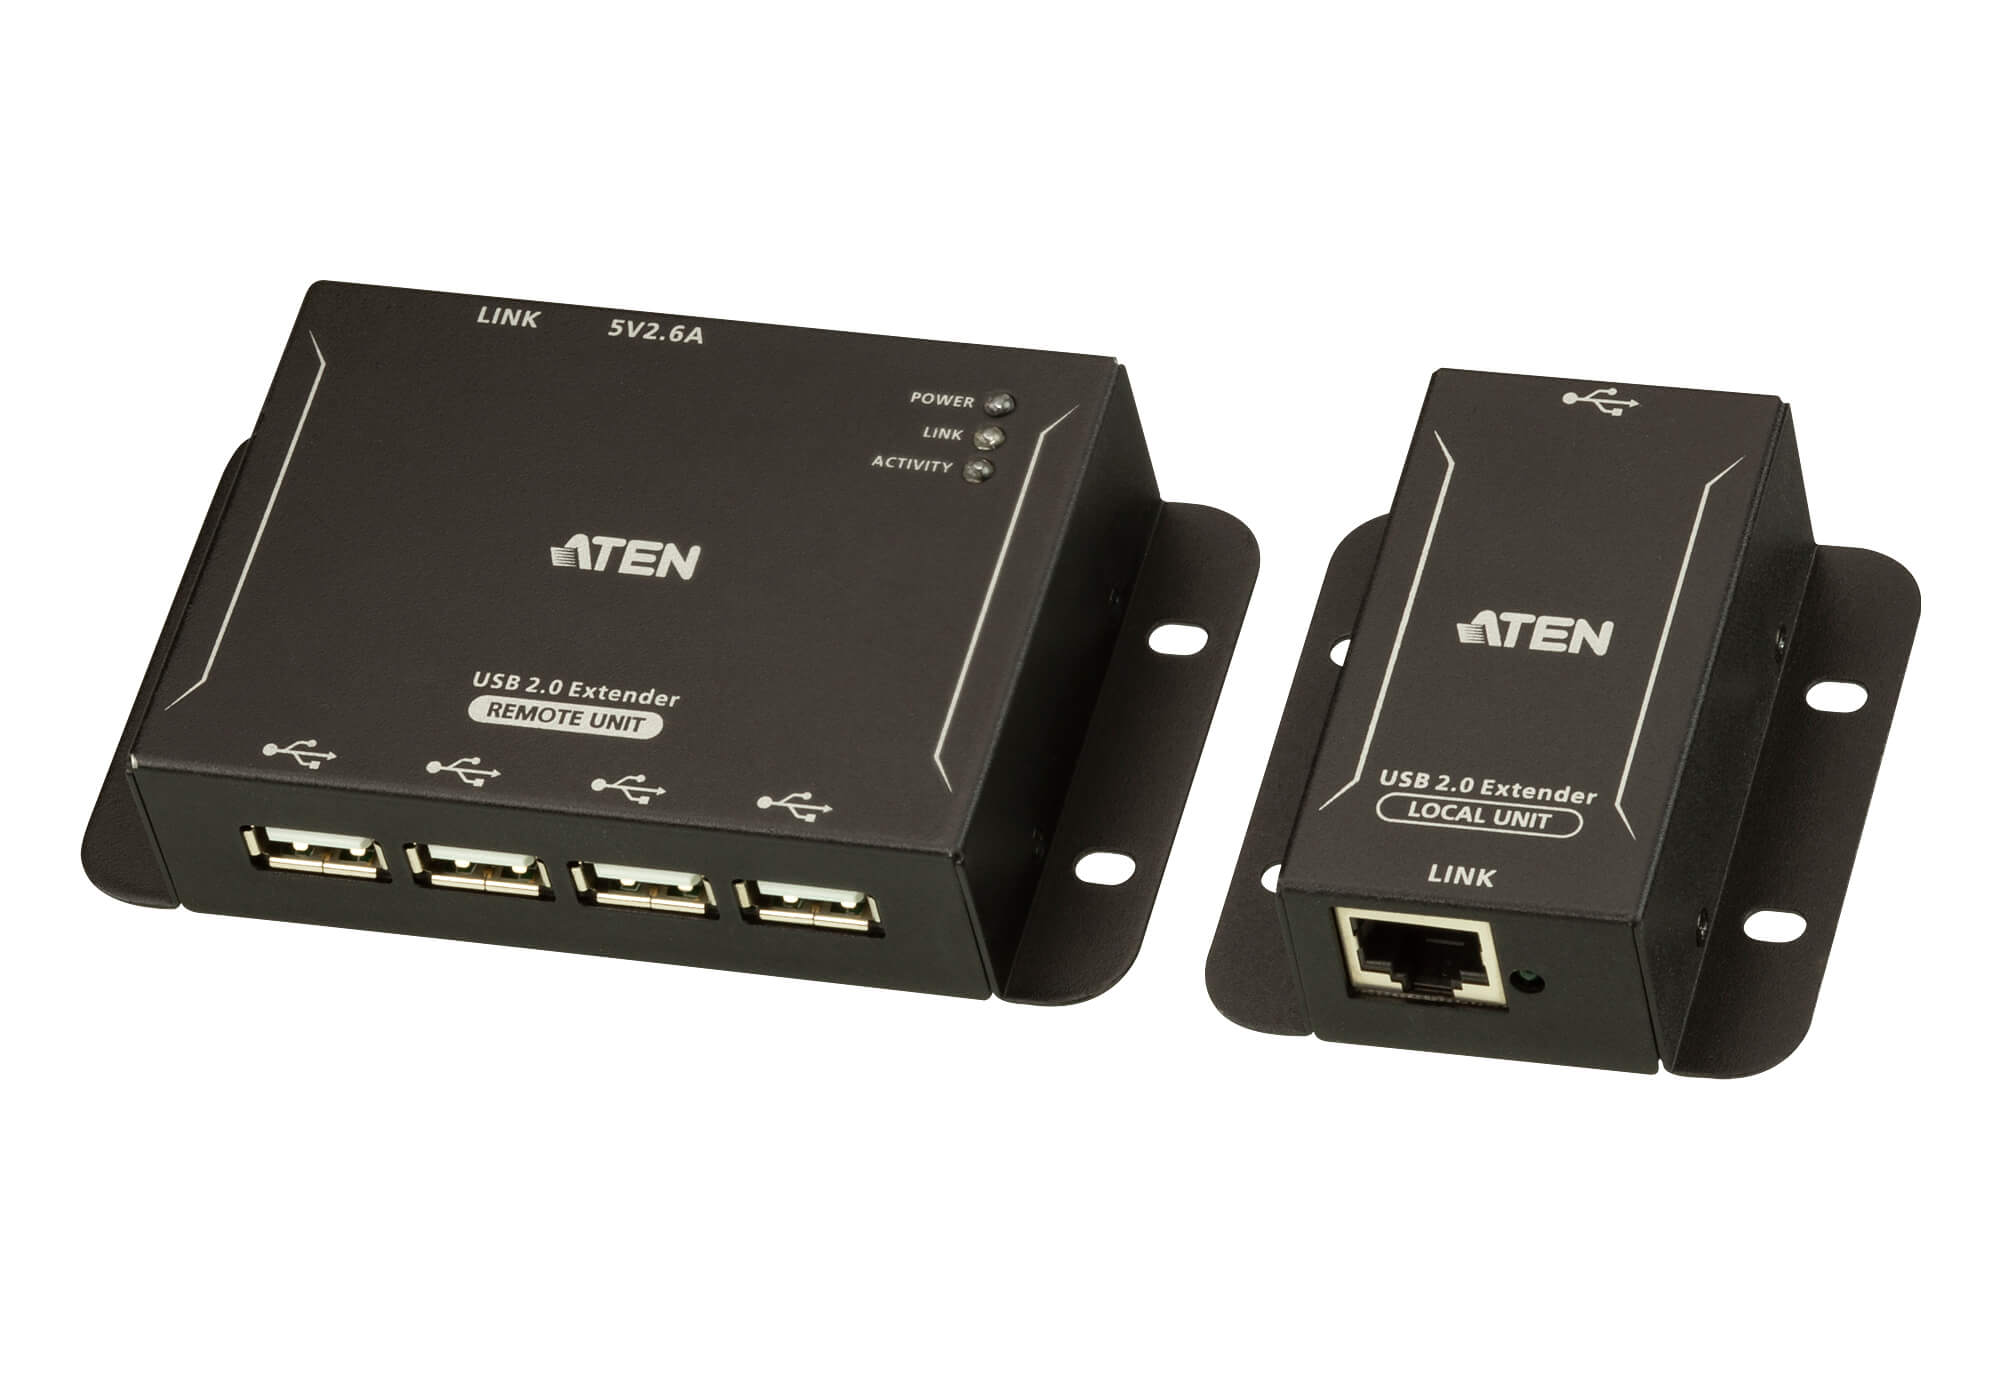 You Recently Viewed Aten UCE3250 4-port USB 2.0 CAT 5 Extender (up to 50m) Image